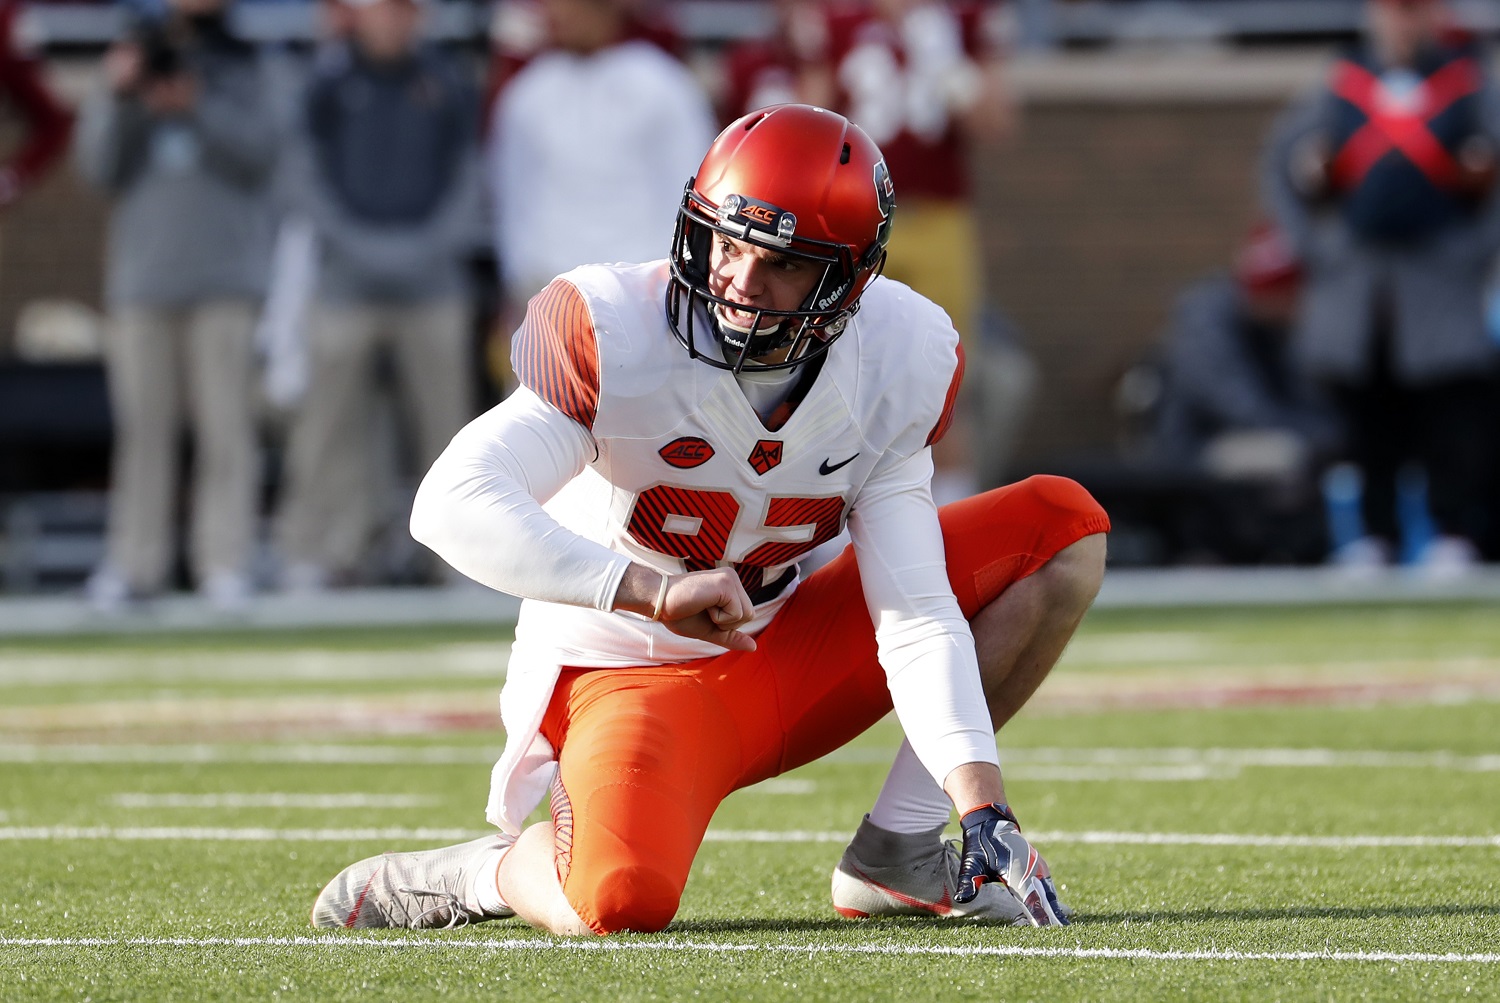 Nolan Cooney prepares to hold on an extra-point attempt for Syracuse University against Boston College in 2018.